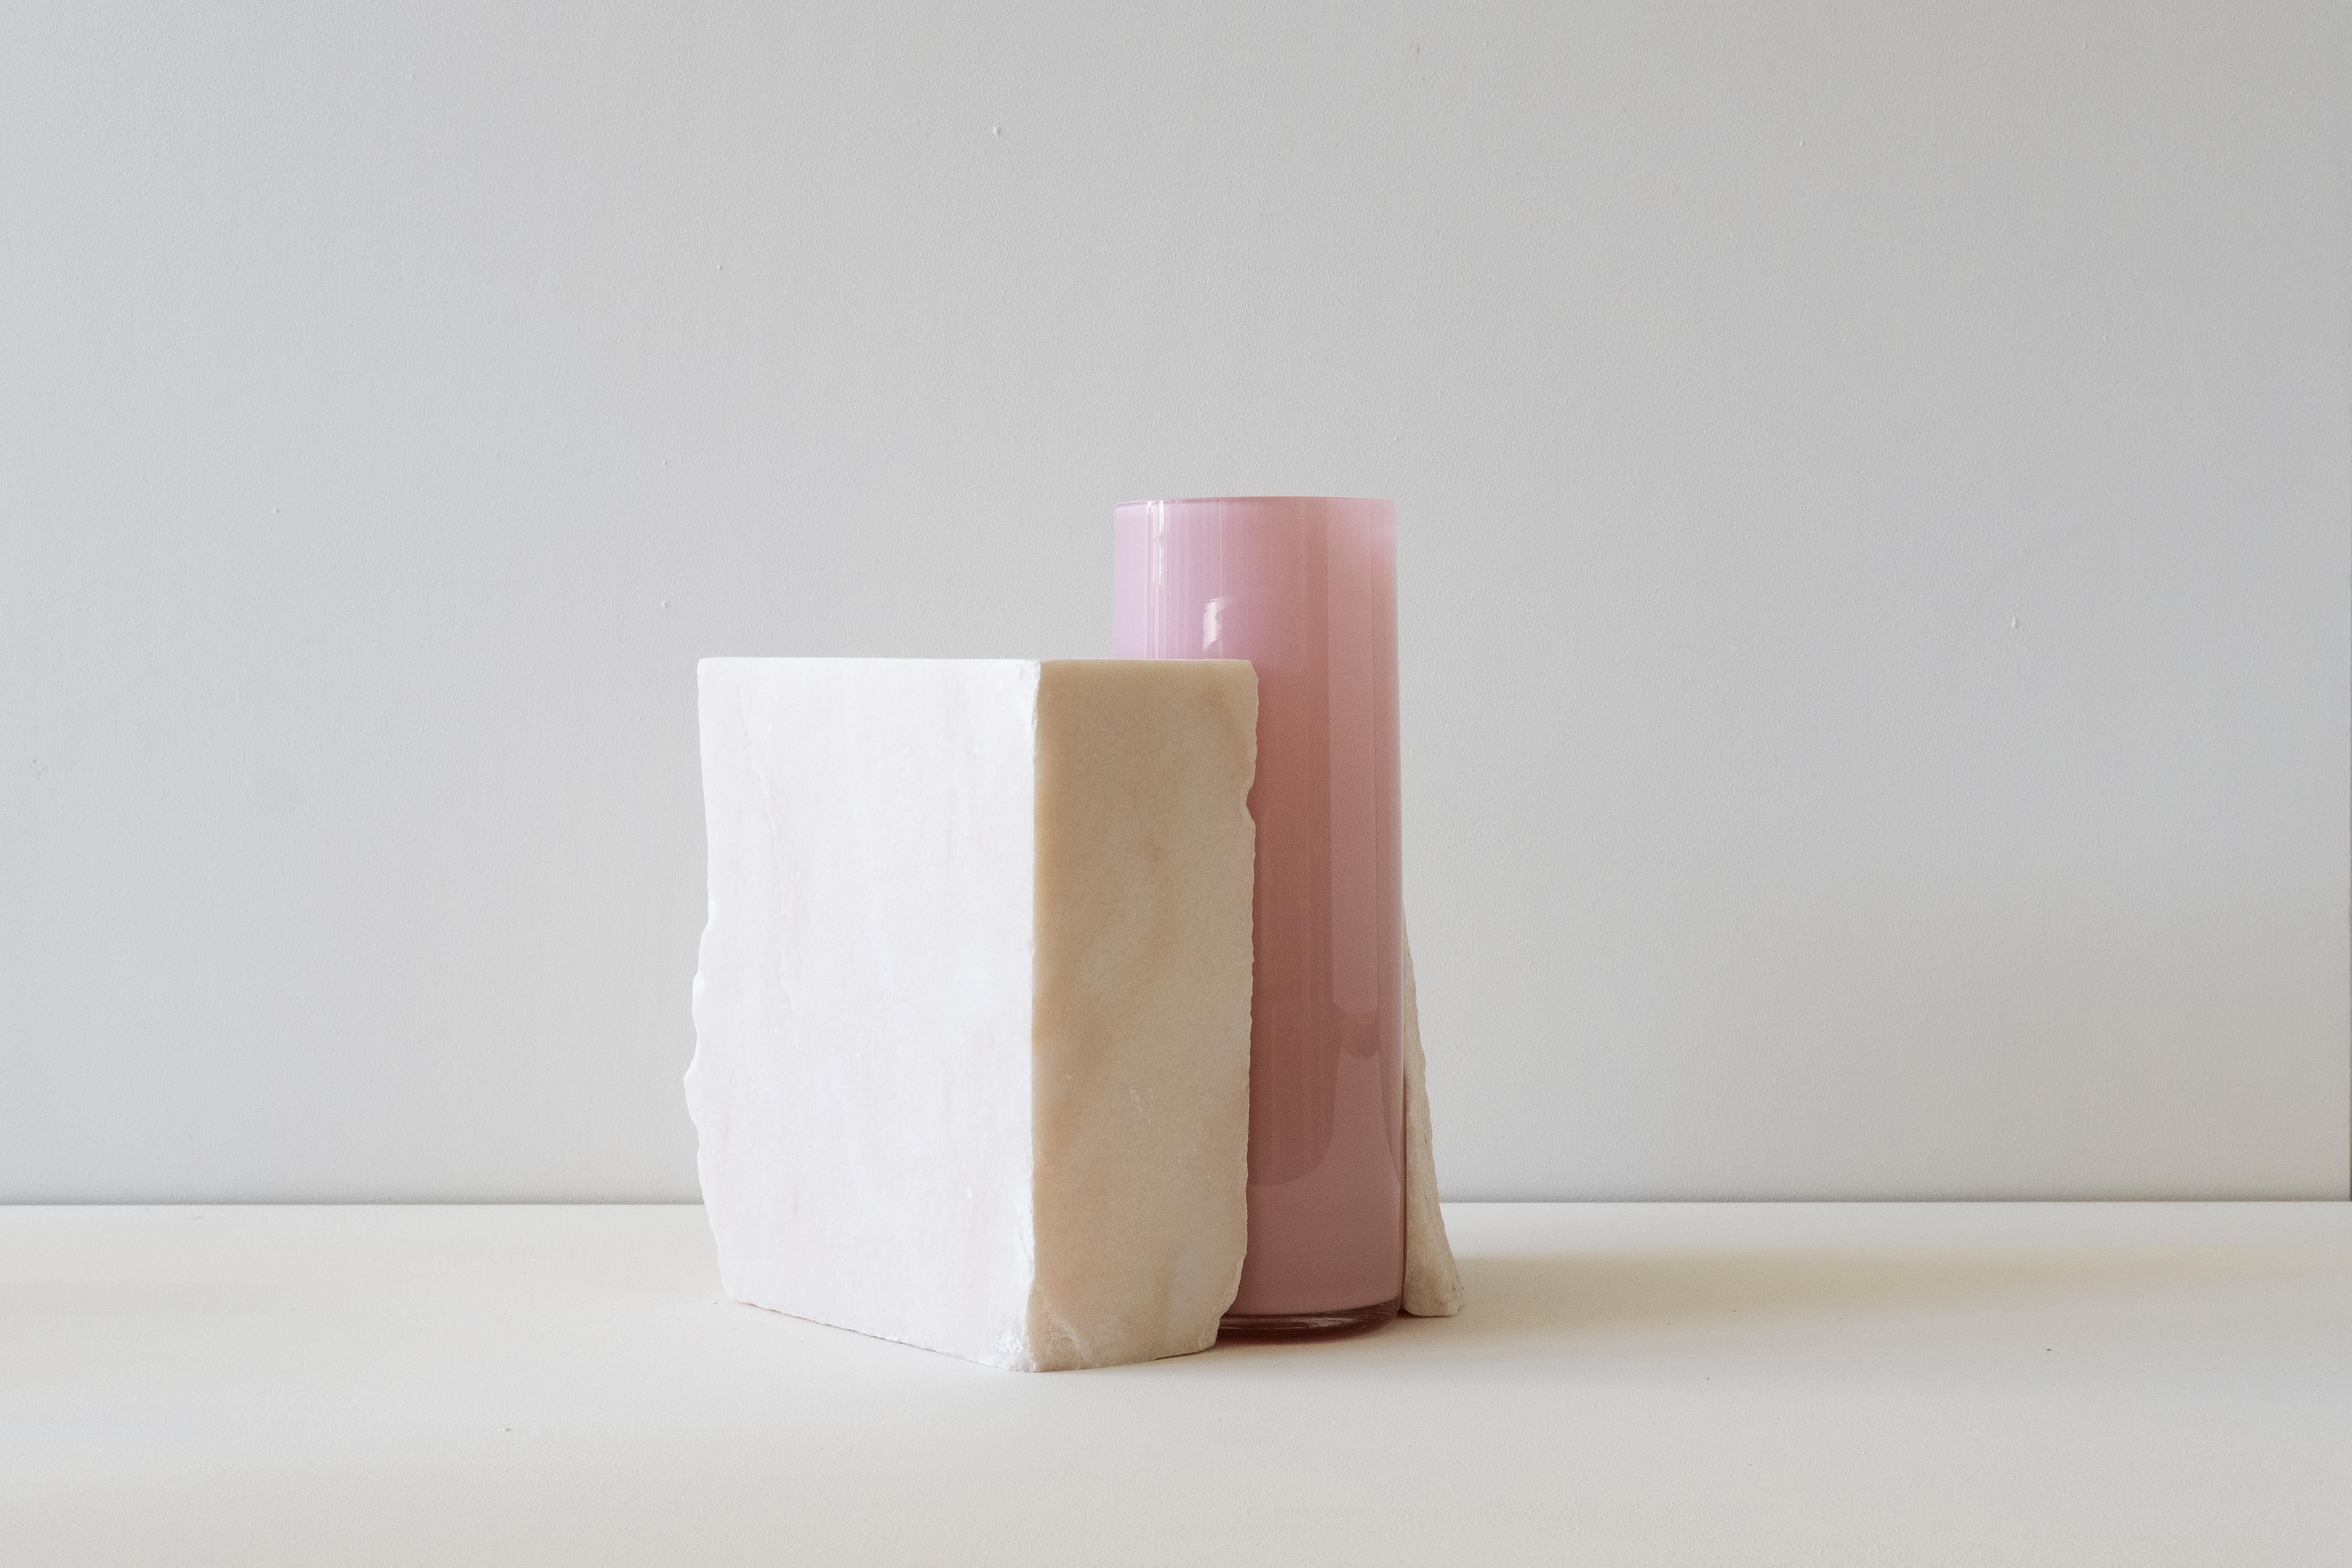 Drill vases

Part chaos and part control, Drill vases are an exercise in
improvisation. 

The origin of the project lies in Carrara, and the small fragments of
marble found discarded by quarries in the region. I began to collect
these